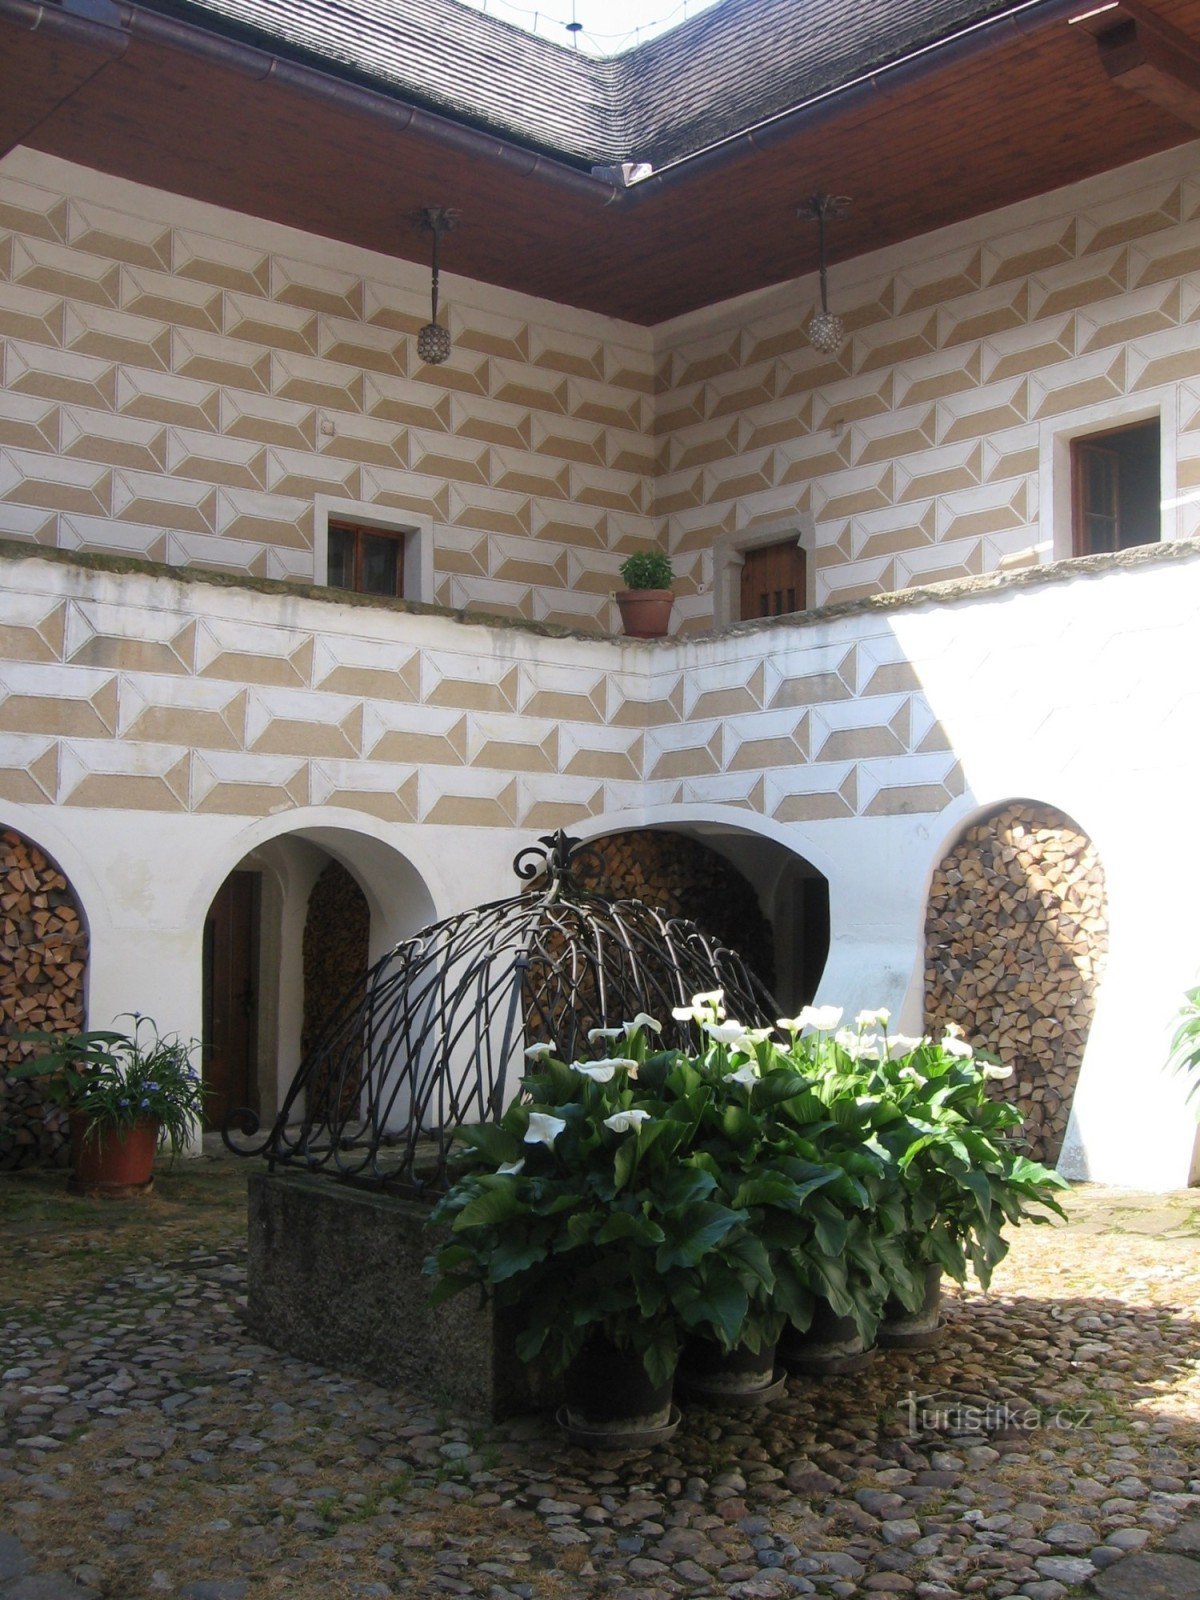 The courtyard of the fortress